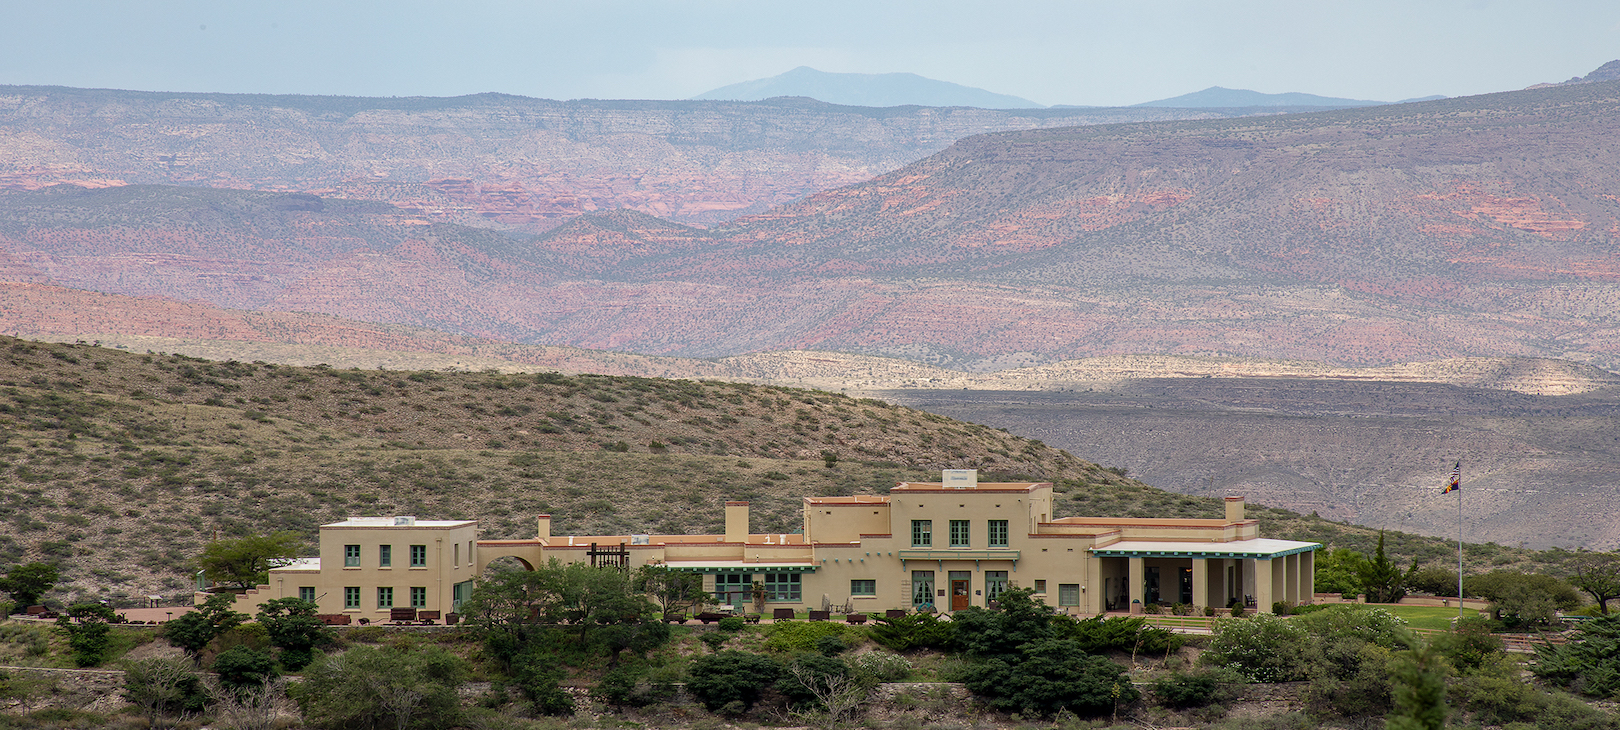 The Douglas Mansion in the Verde Valley, show from Jerome